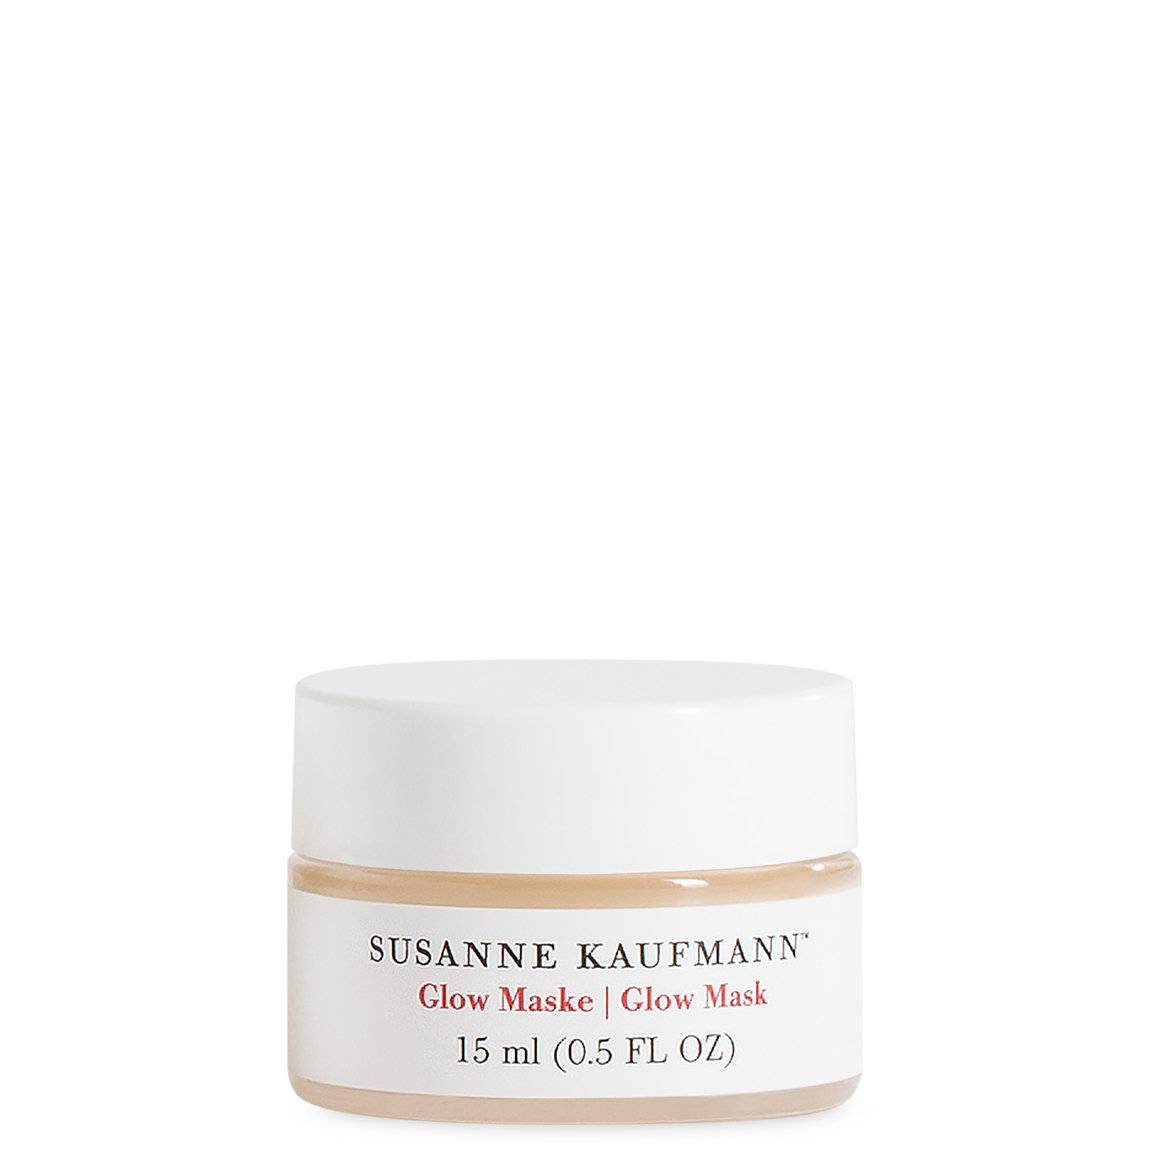 Free deluxe mini Glow Mask with qualifying Susanne Kaufmann purchase